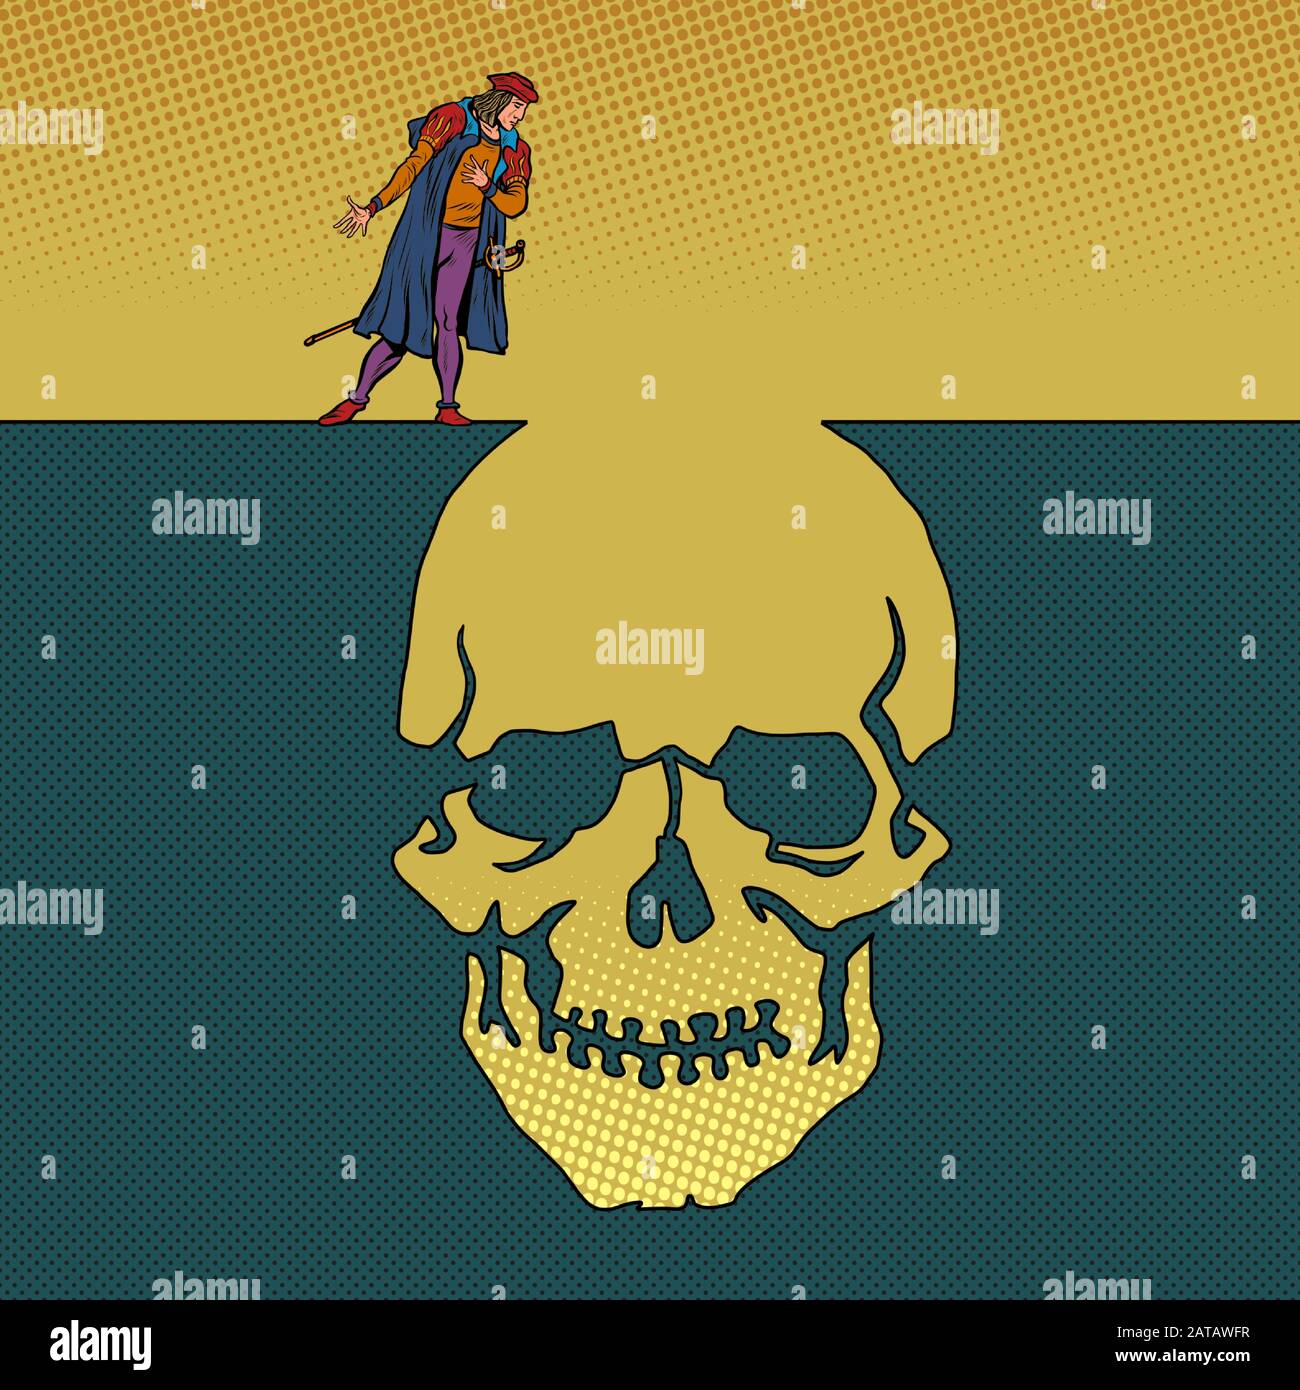 hamlet and the skull. Man next to a deep pit silhouette Stock Vector